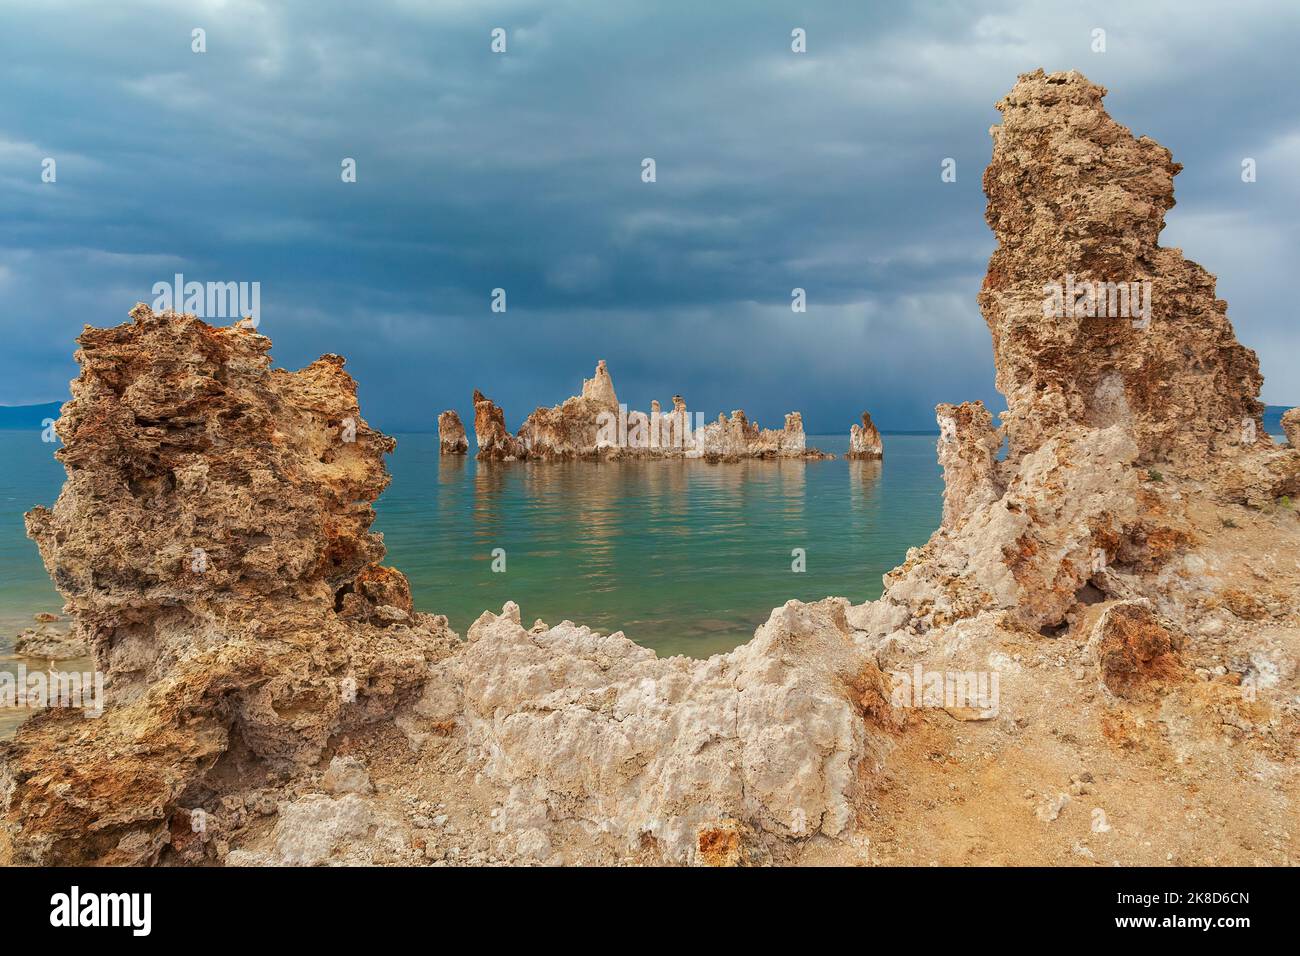 The tufa formations at Mono lake with a stormy sky backdrop. Stock Photo